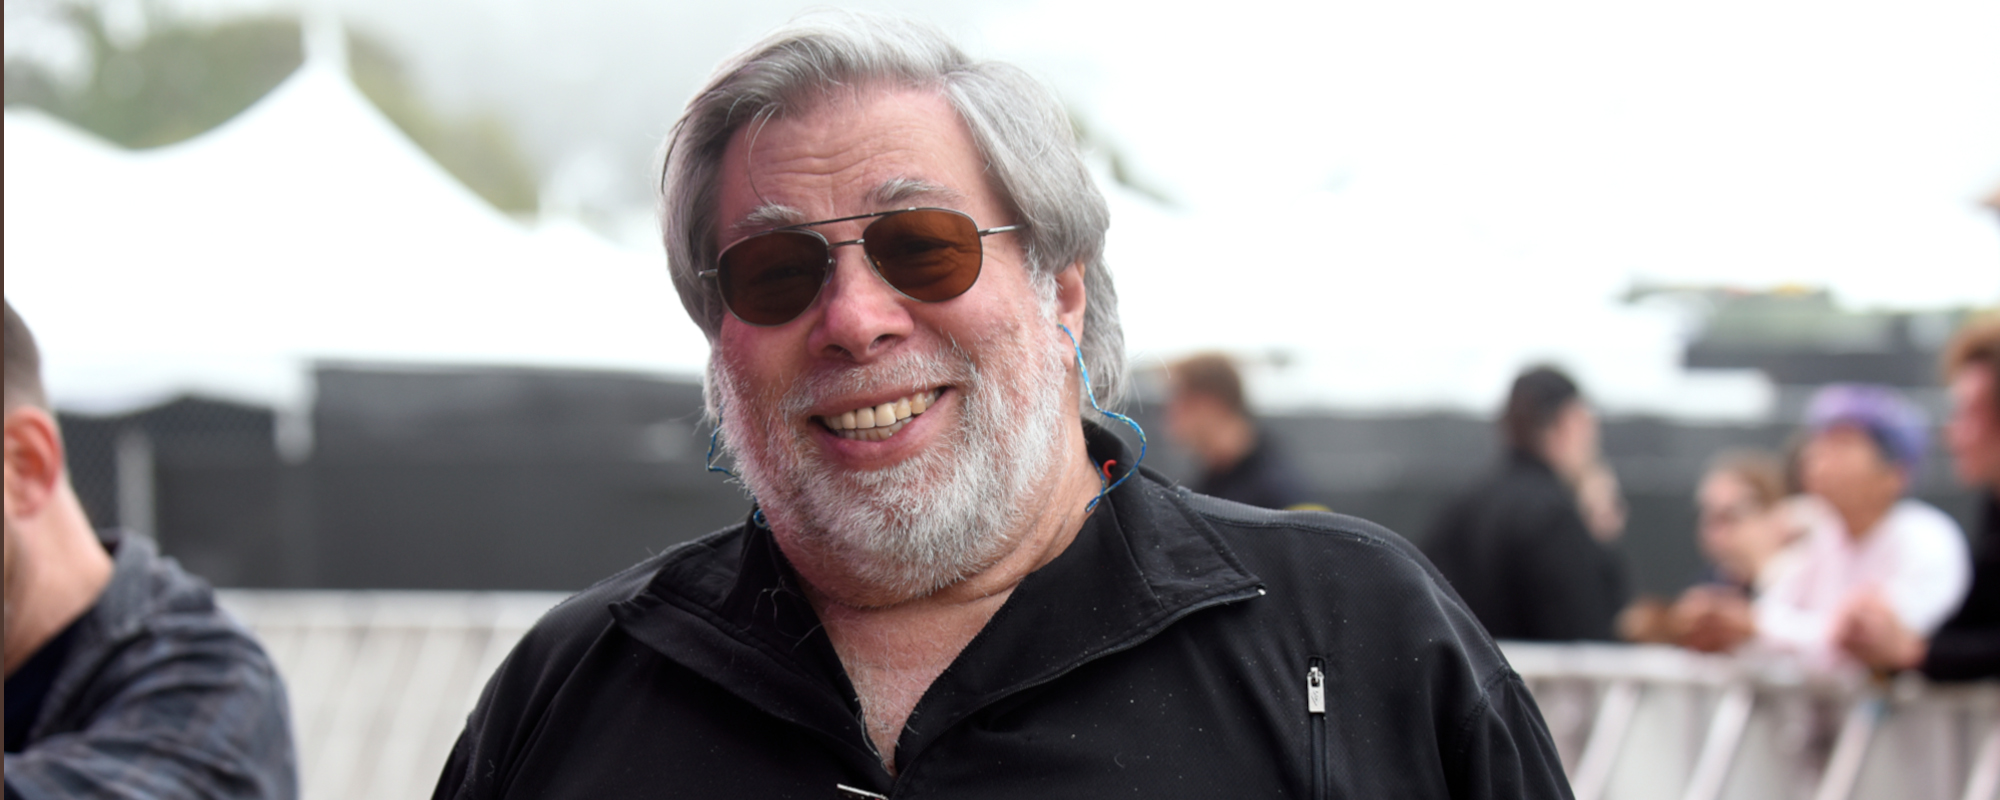 Apple Co-Founder Steve Wozniak: “Spotify Doesn’t Care About the Same Things that I Do.”